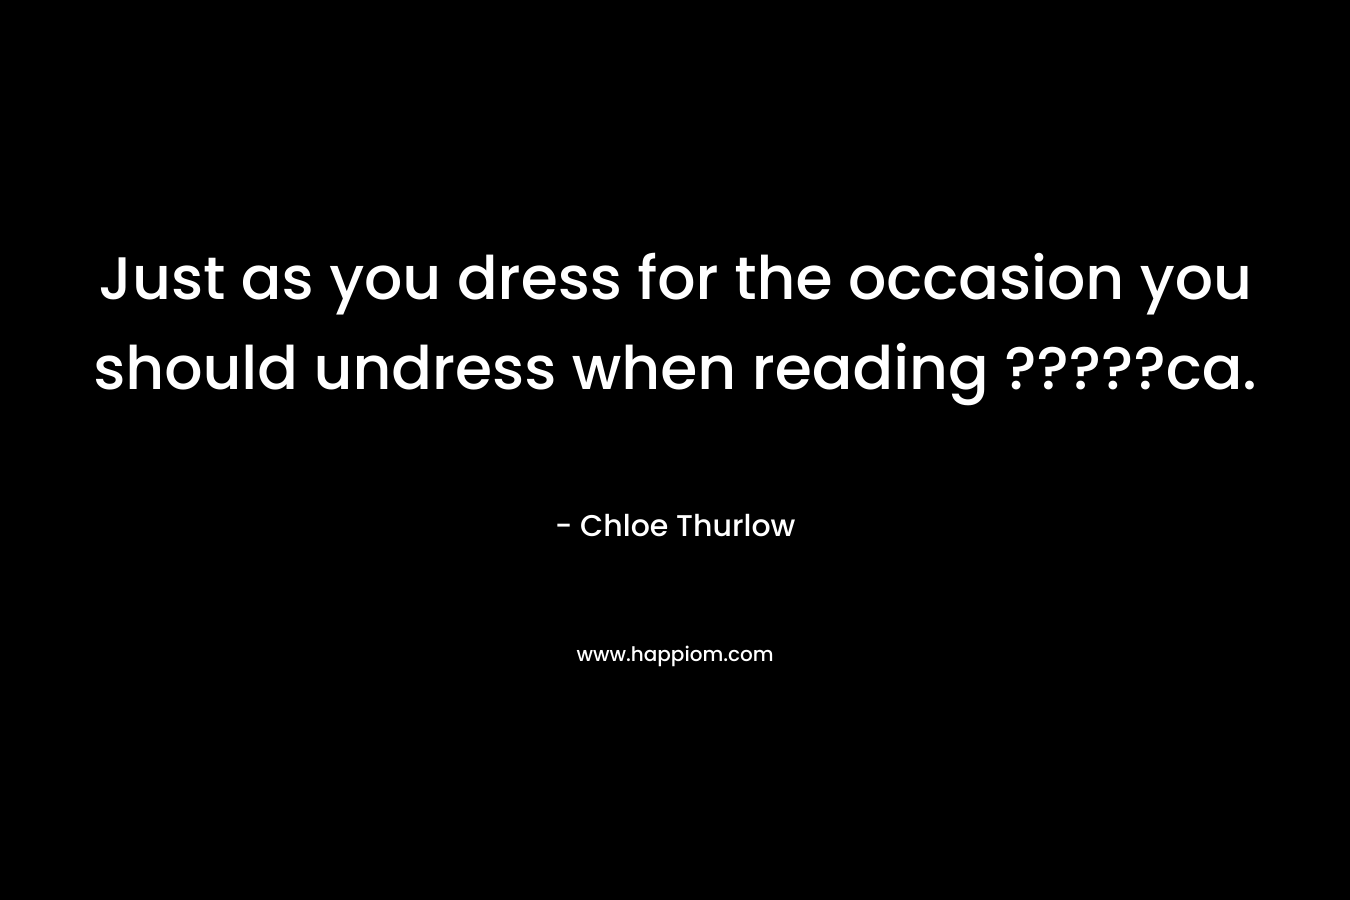 Just as you dress for the occasion you should undress when reading ?????ca. – Chloe Thurlow